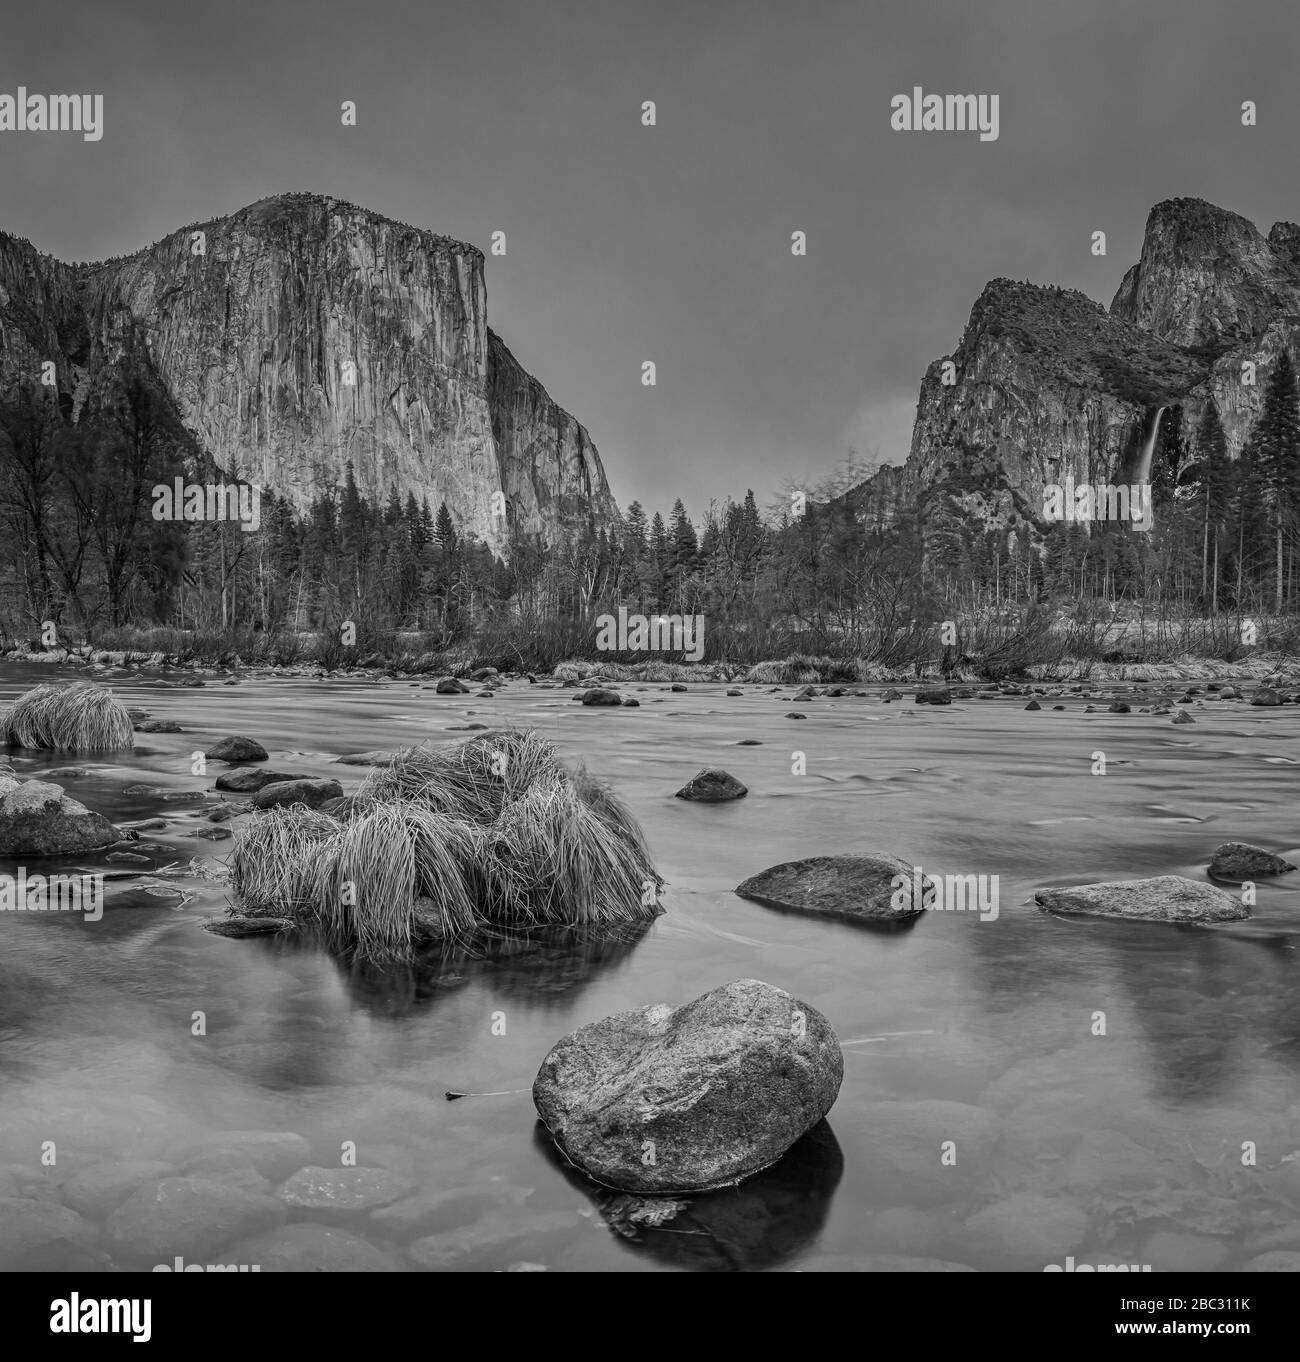 A black and white image of the famous Yosemite Valley from the Merced River Stock Photo